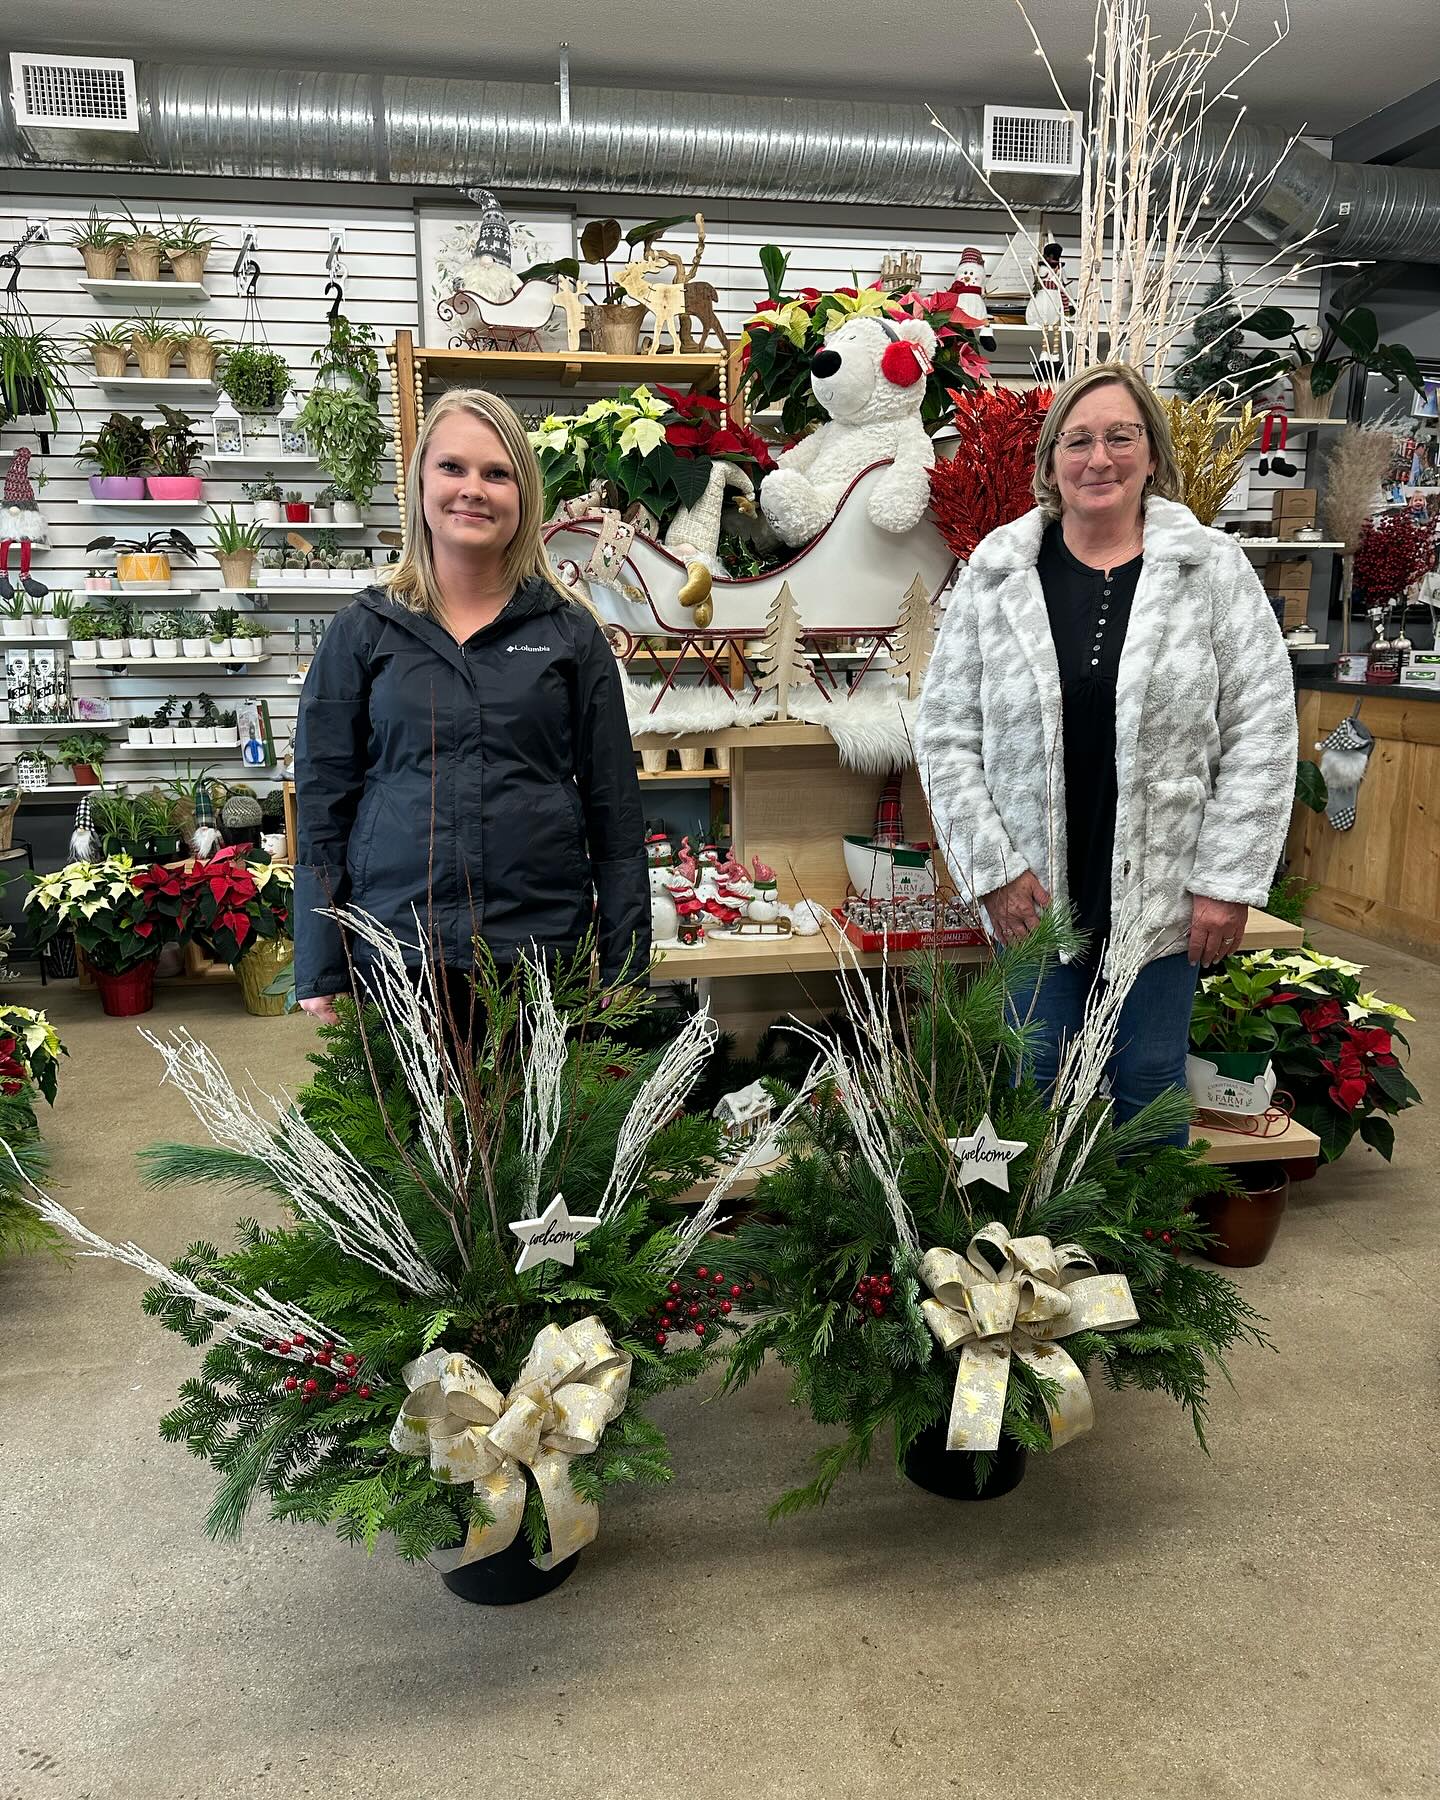 All About Flowers, Gourmet, Gifts, & Home Decor 71 7 Ave S, Yorkton Saskatchewan S3N 3V1